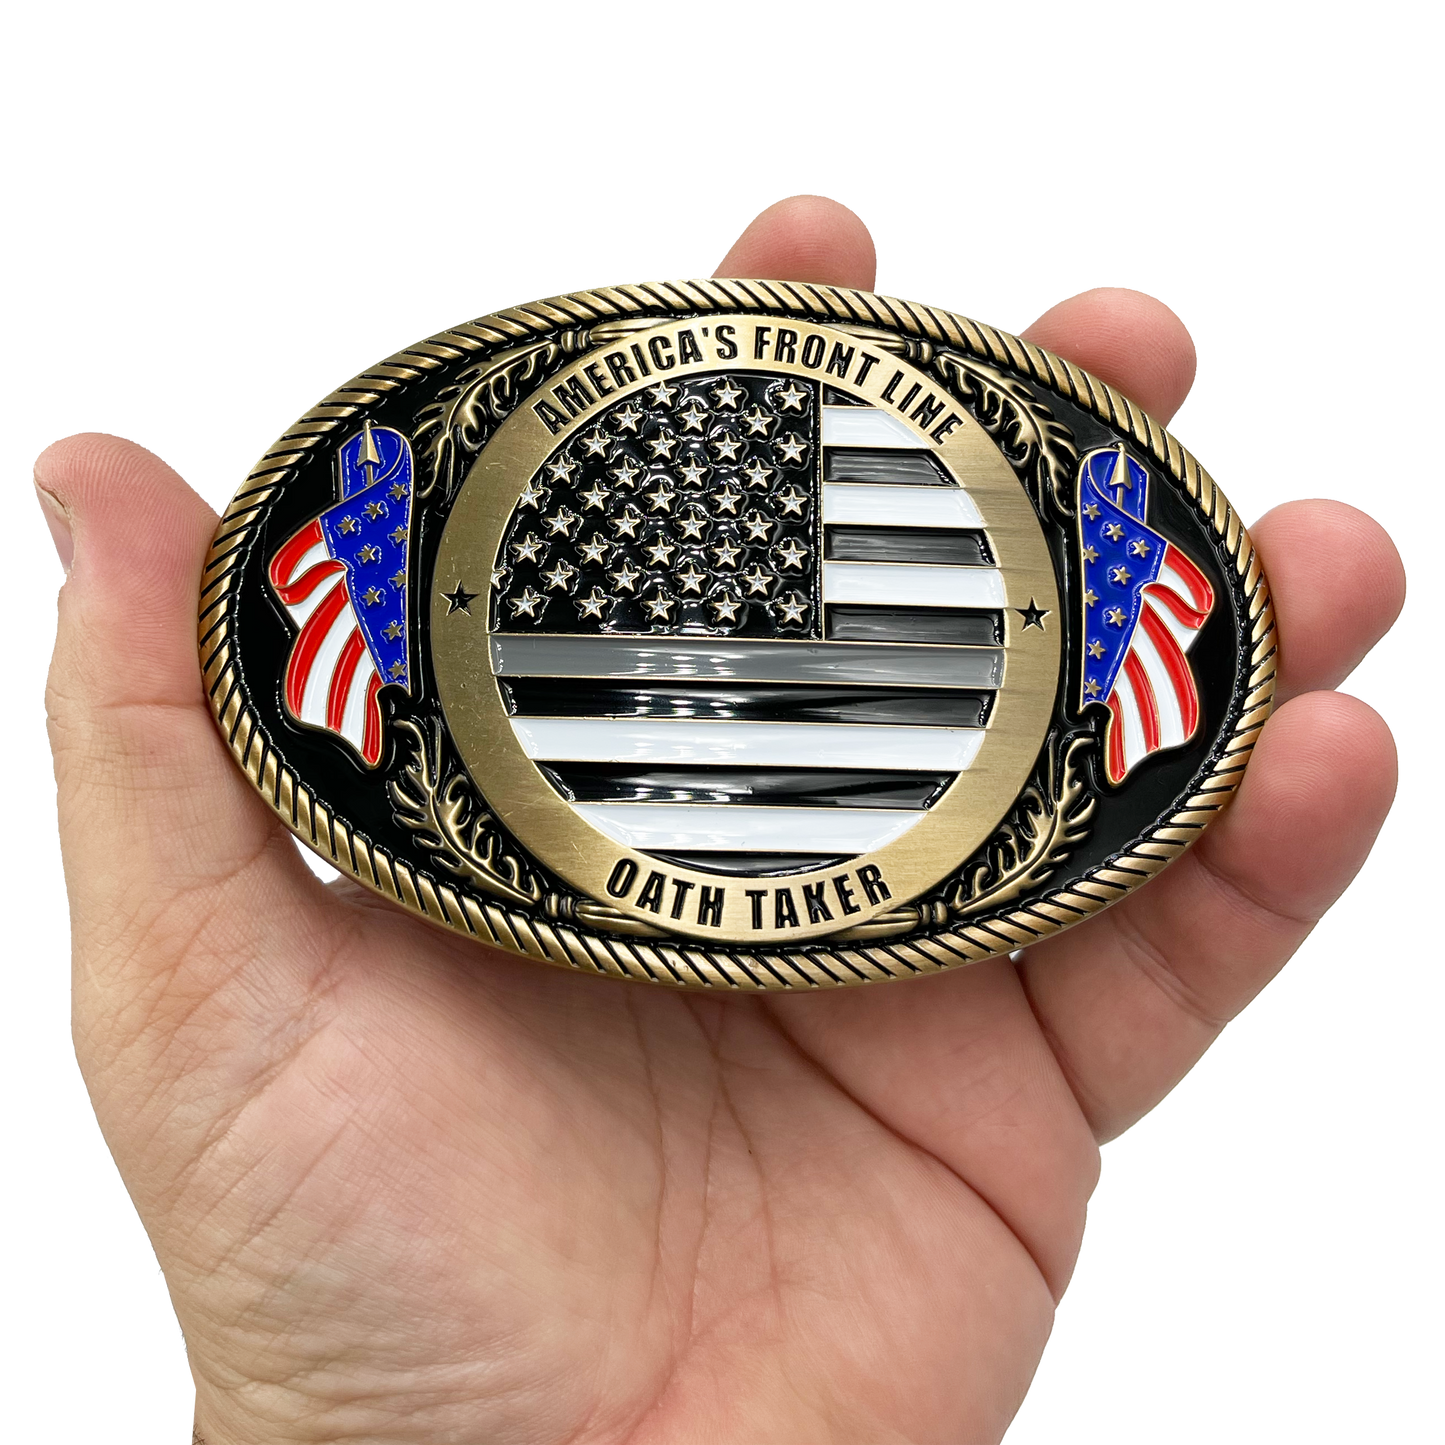 EL4-007 Correctional Officer Antique Gold Thin Gray Line CO Police American Flag Corrections Belt Buckle America's Front Line Oath Taker